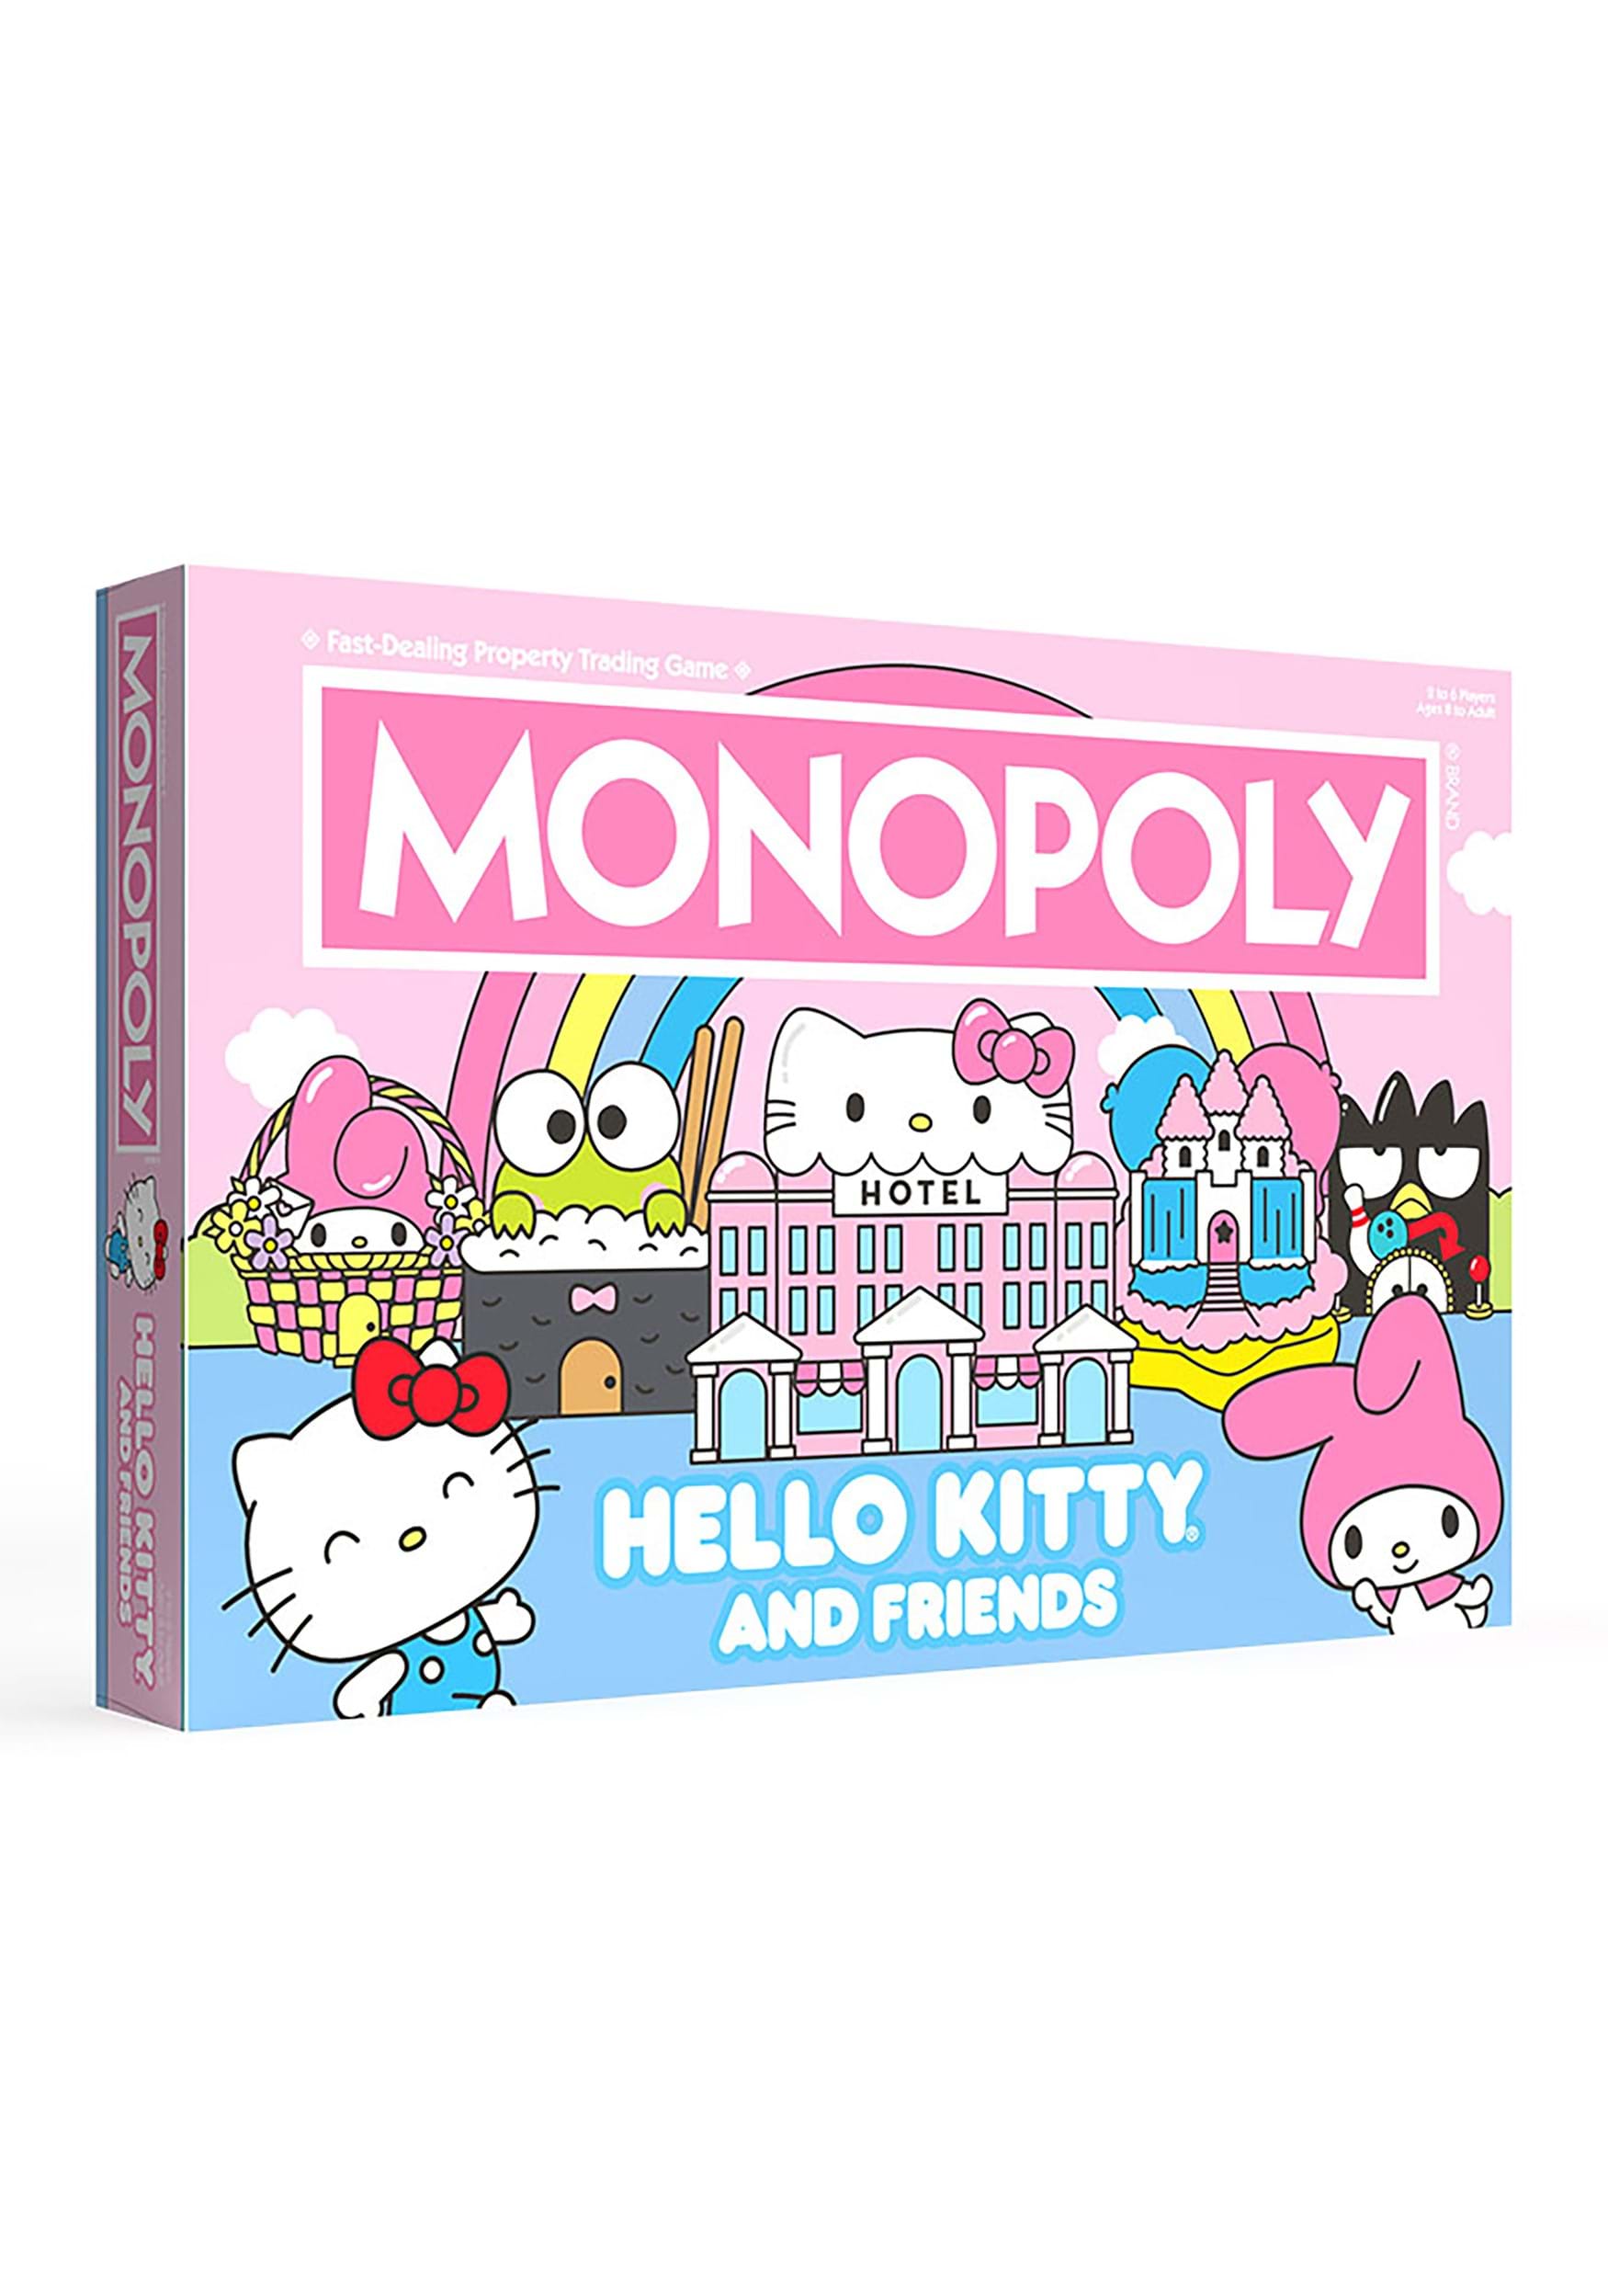 Hello Kitty & Friends Monopoly Game